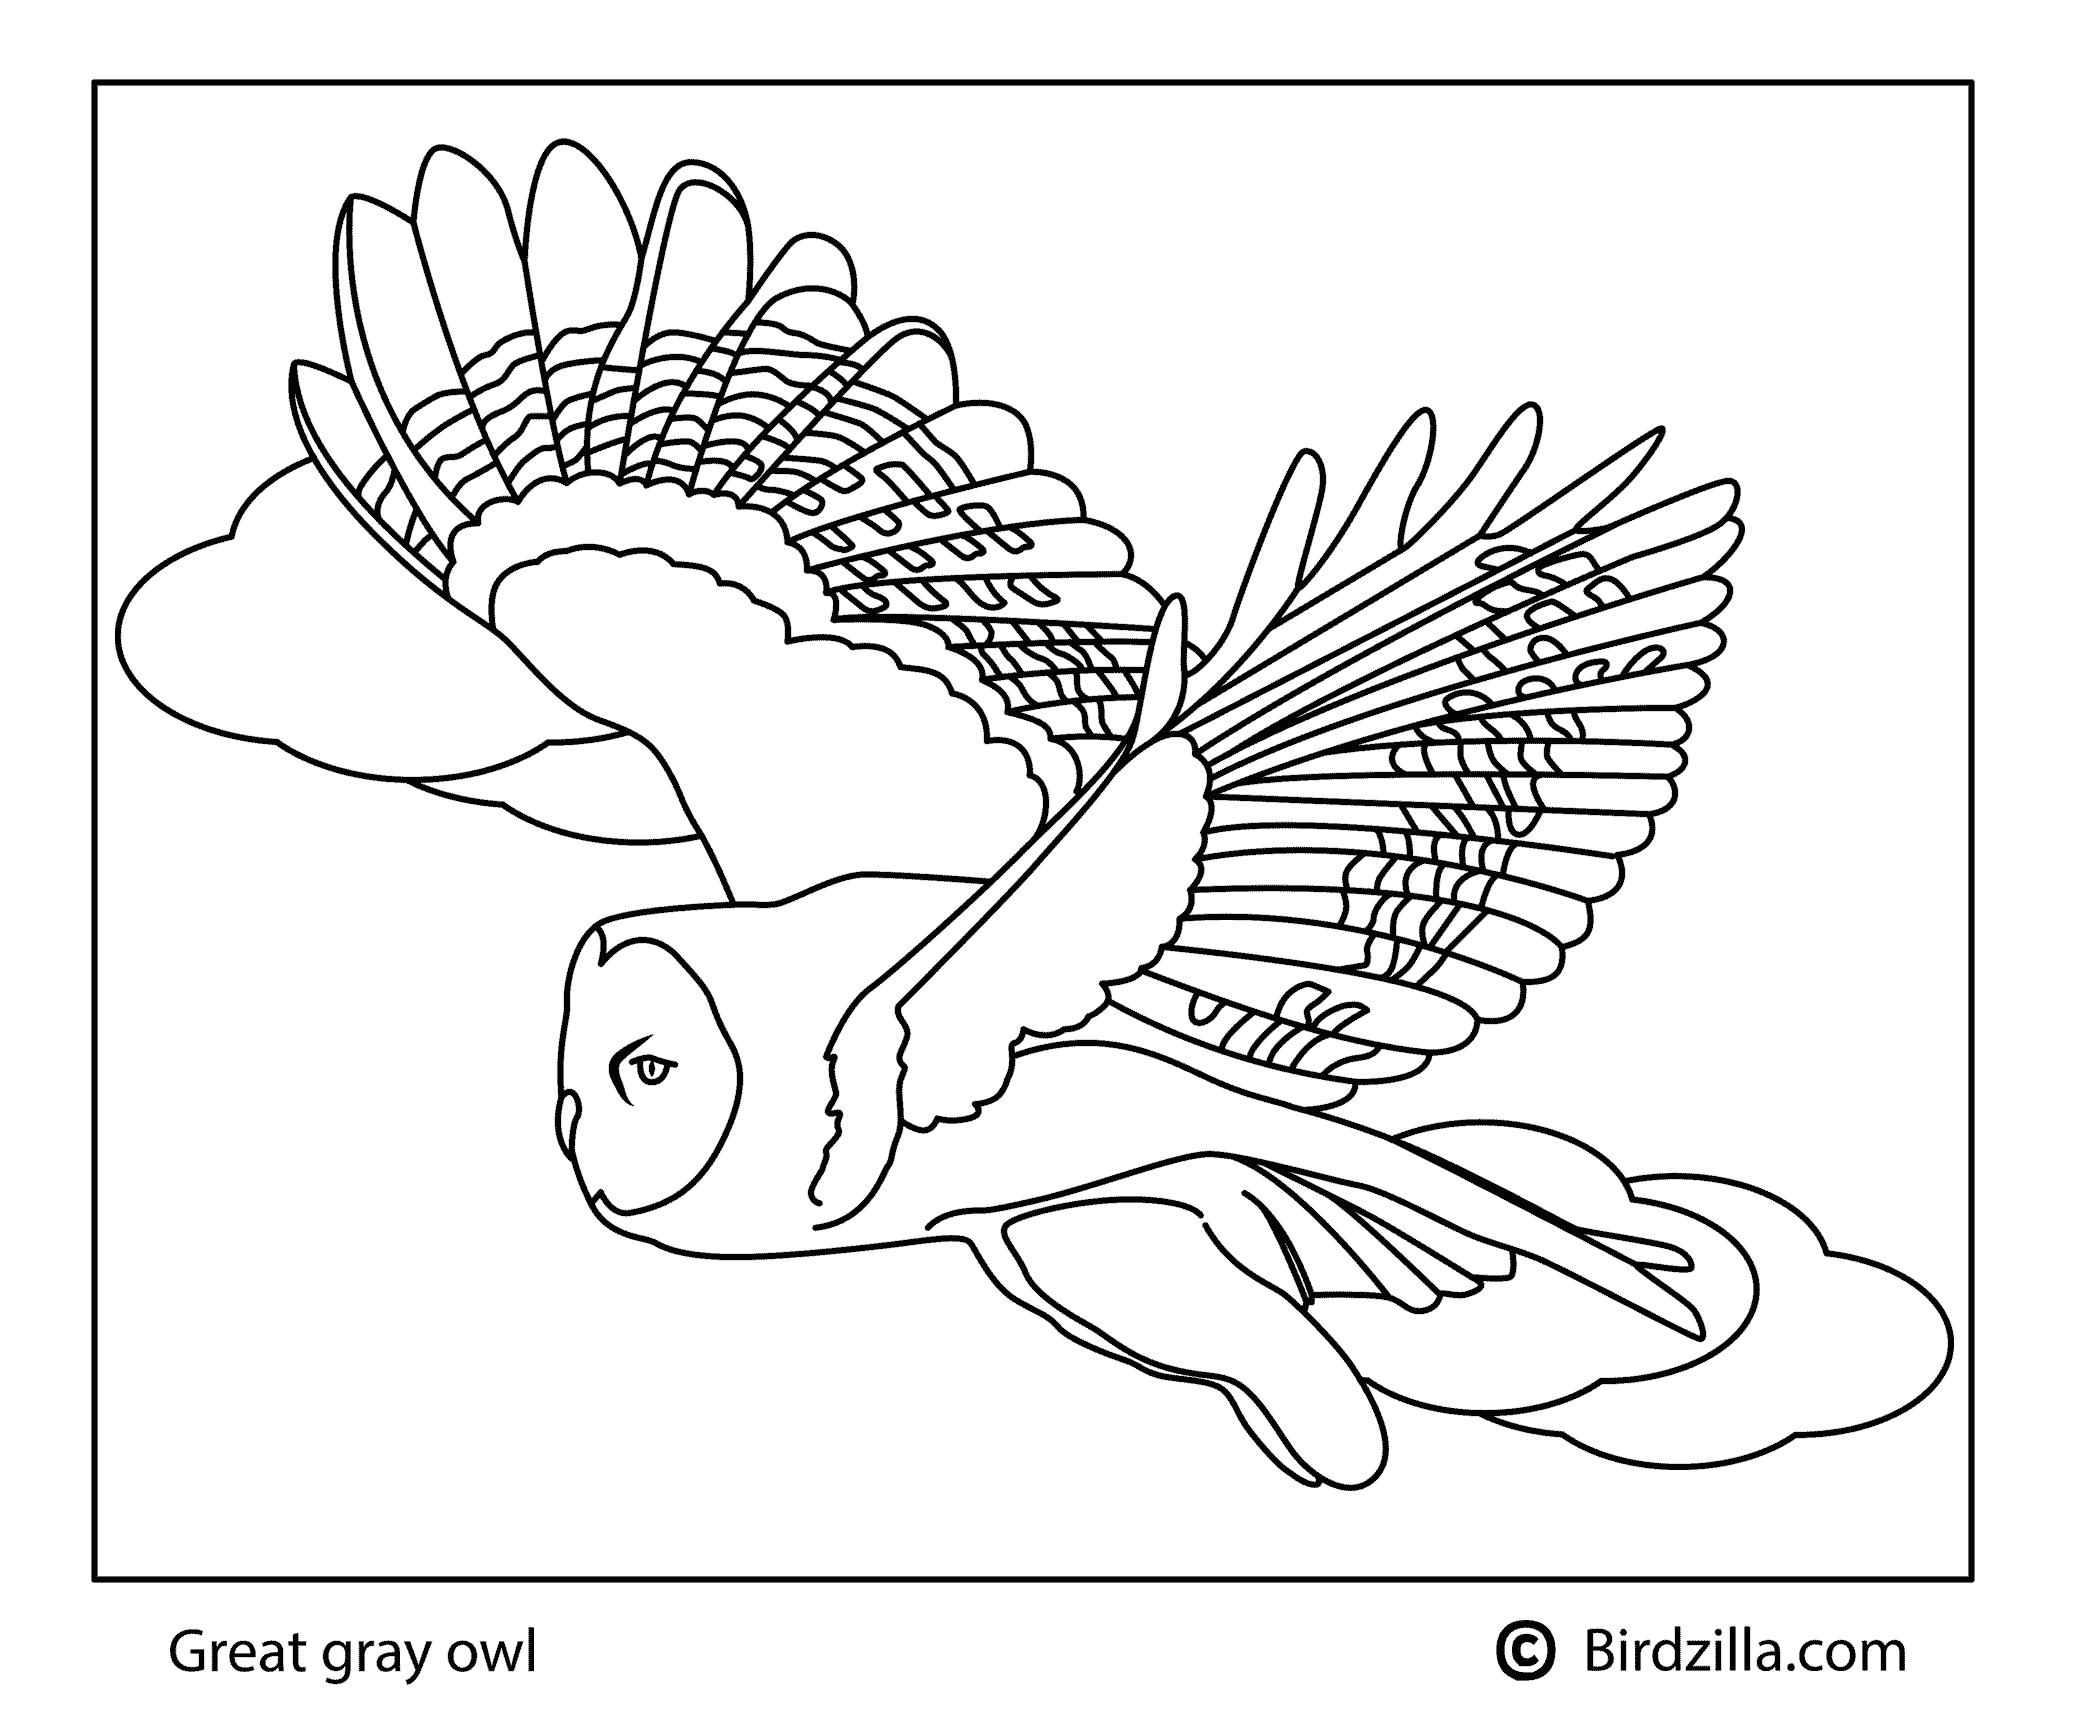 Great-gray-owl-coloring page